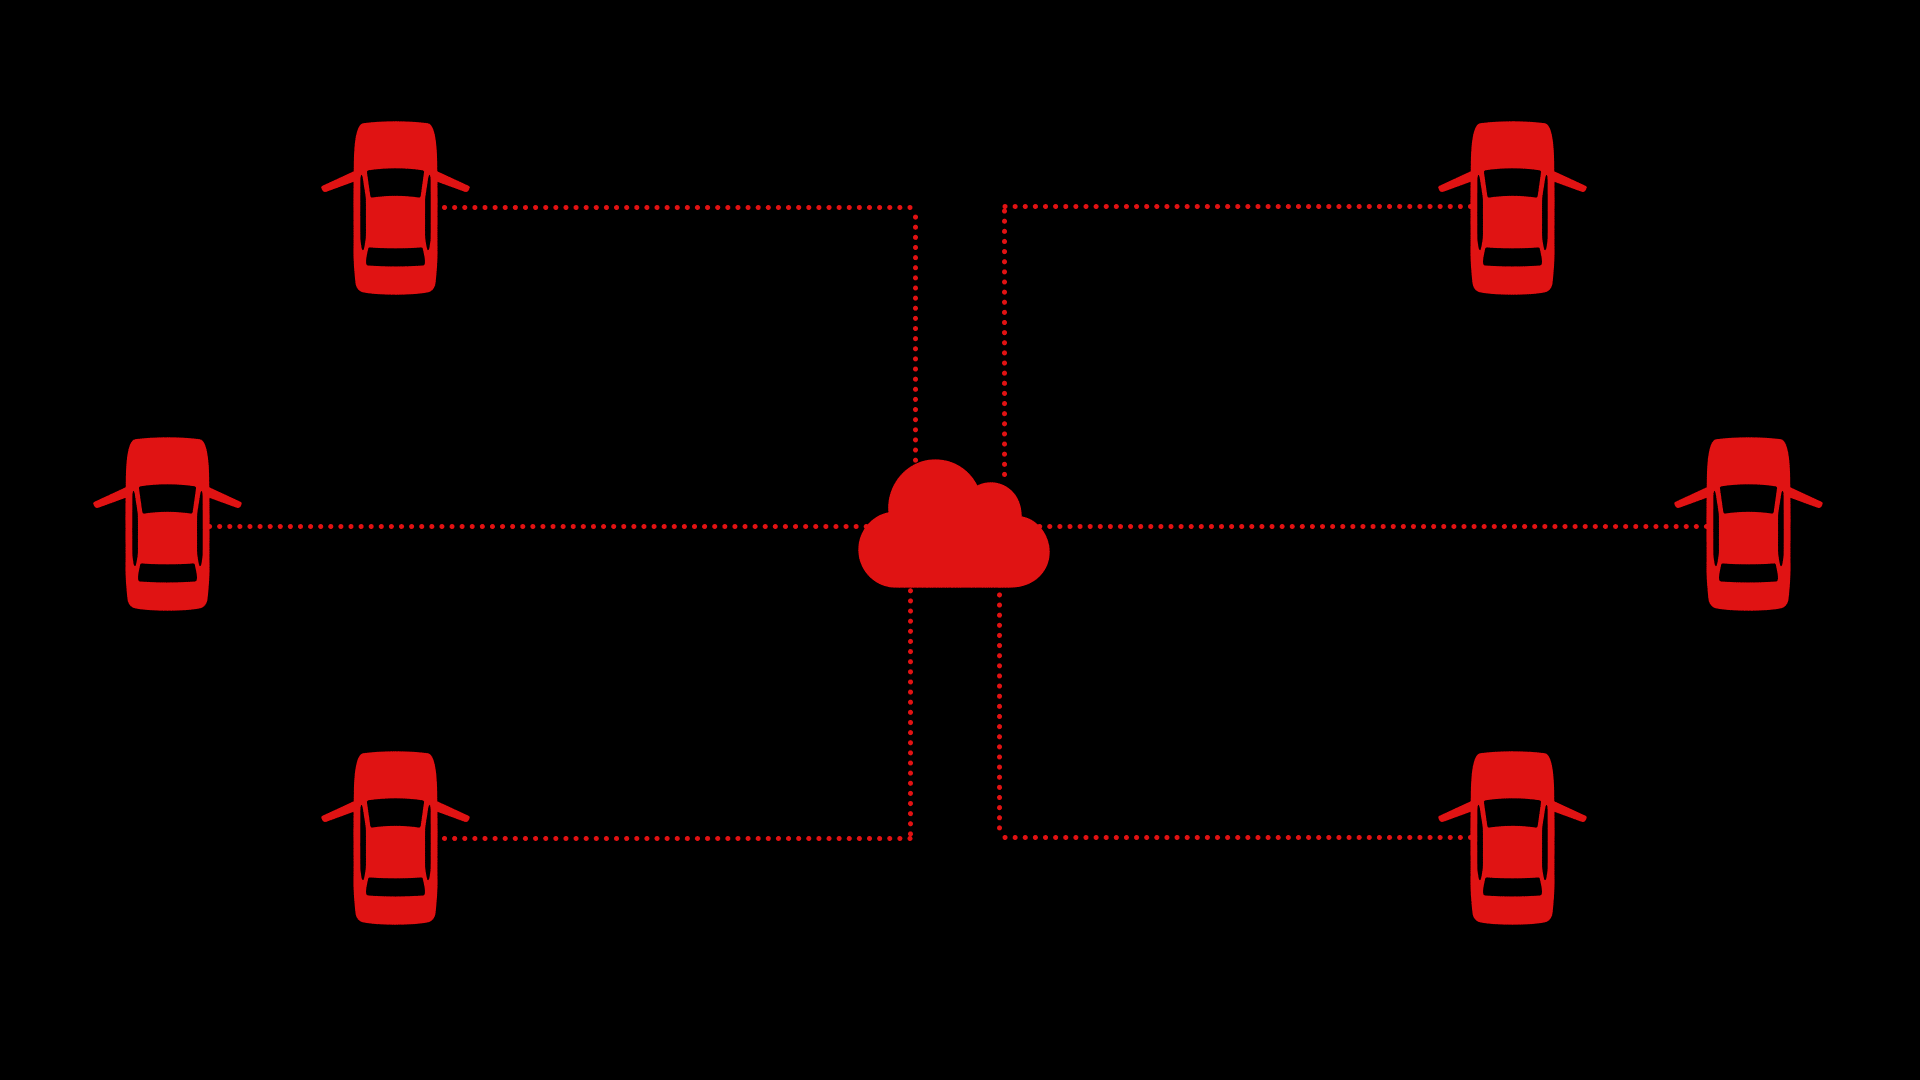 A cloud symbol in red with lines connecting it to red glowing car symbols